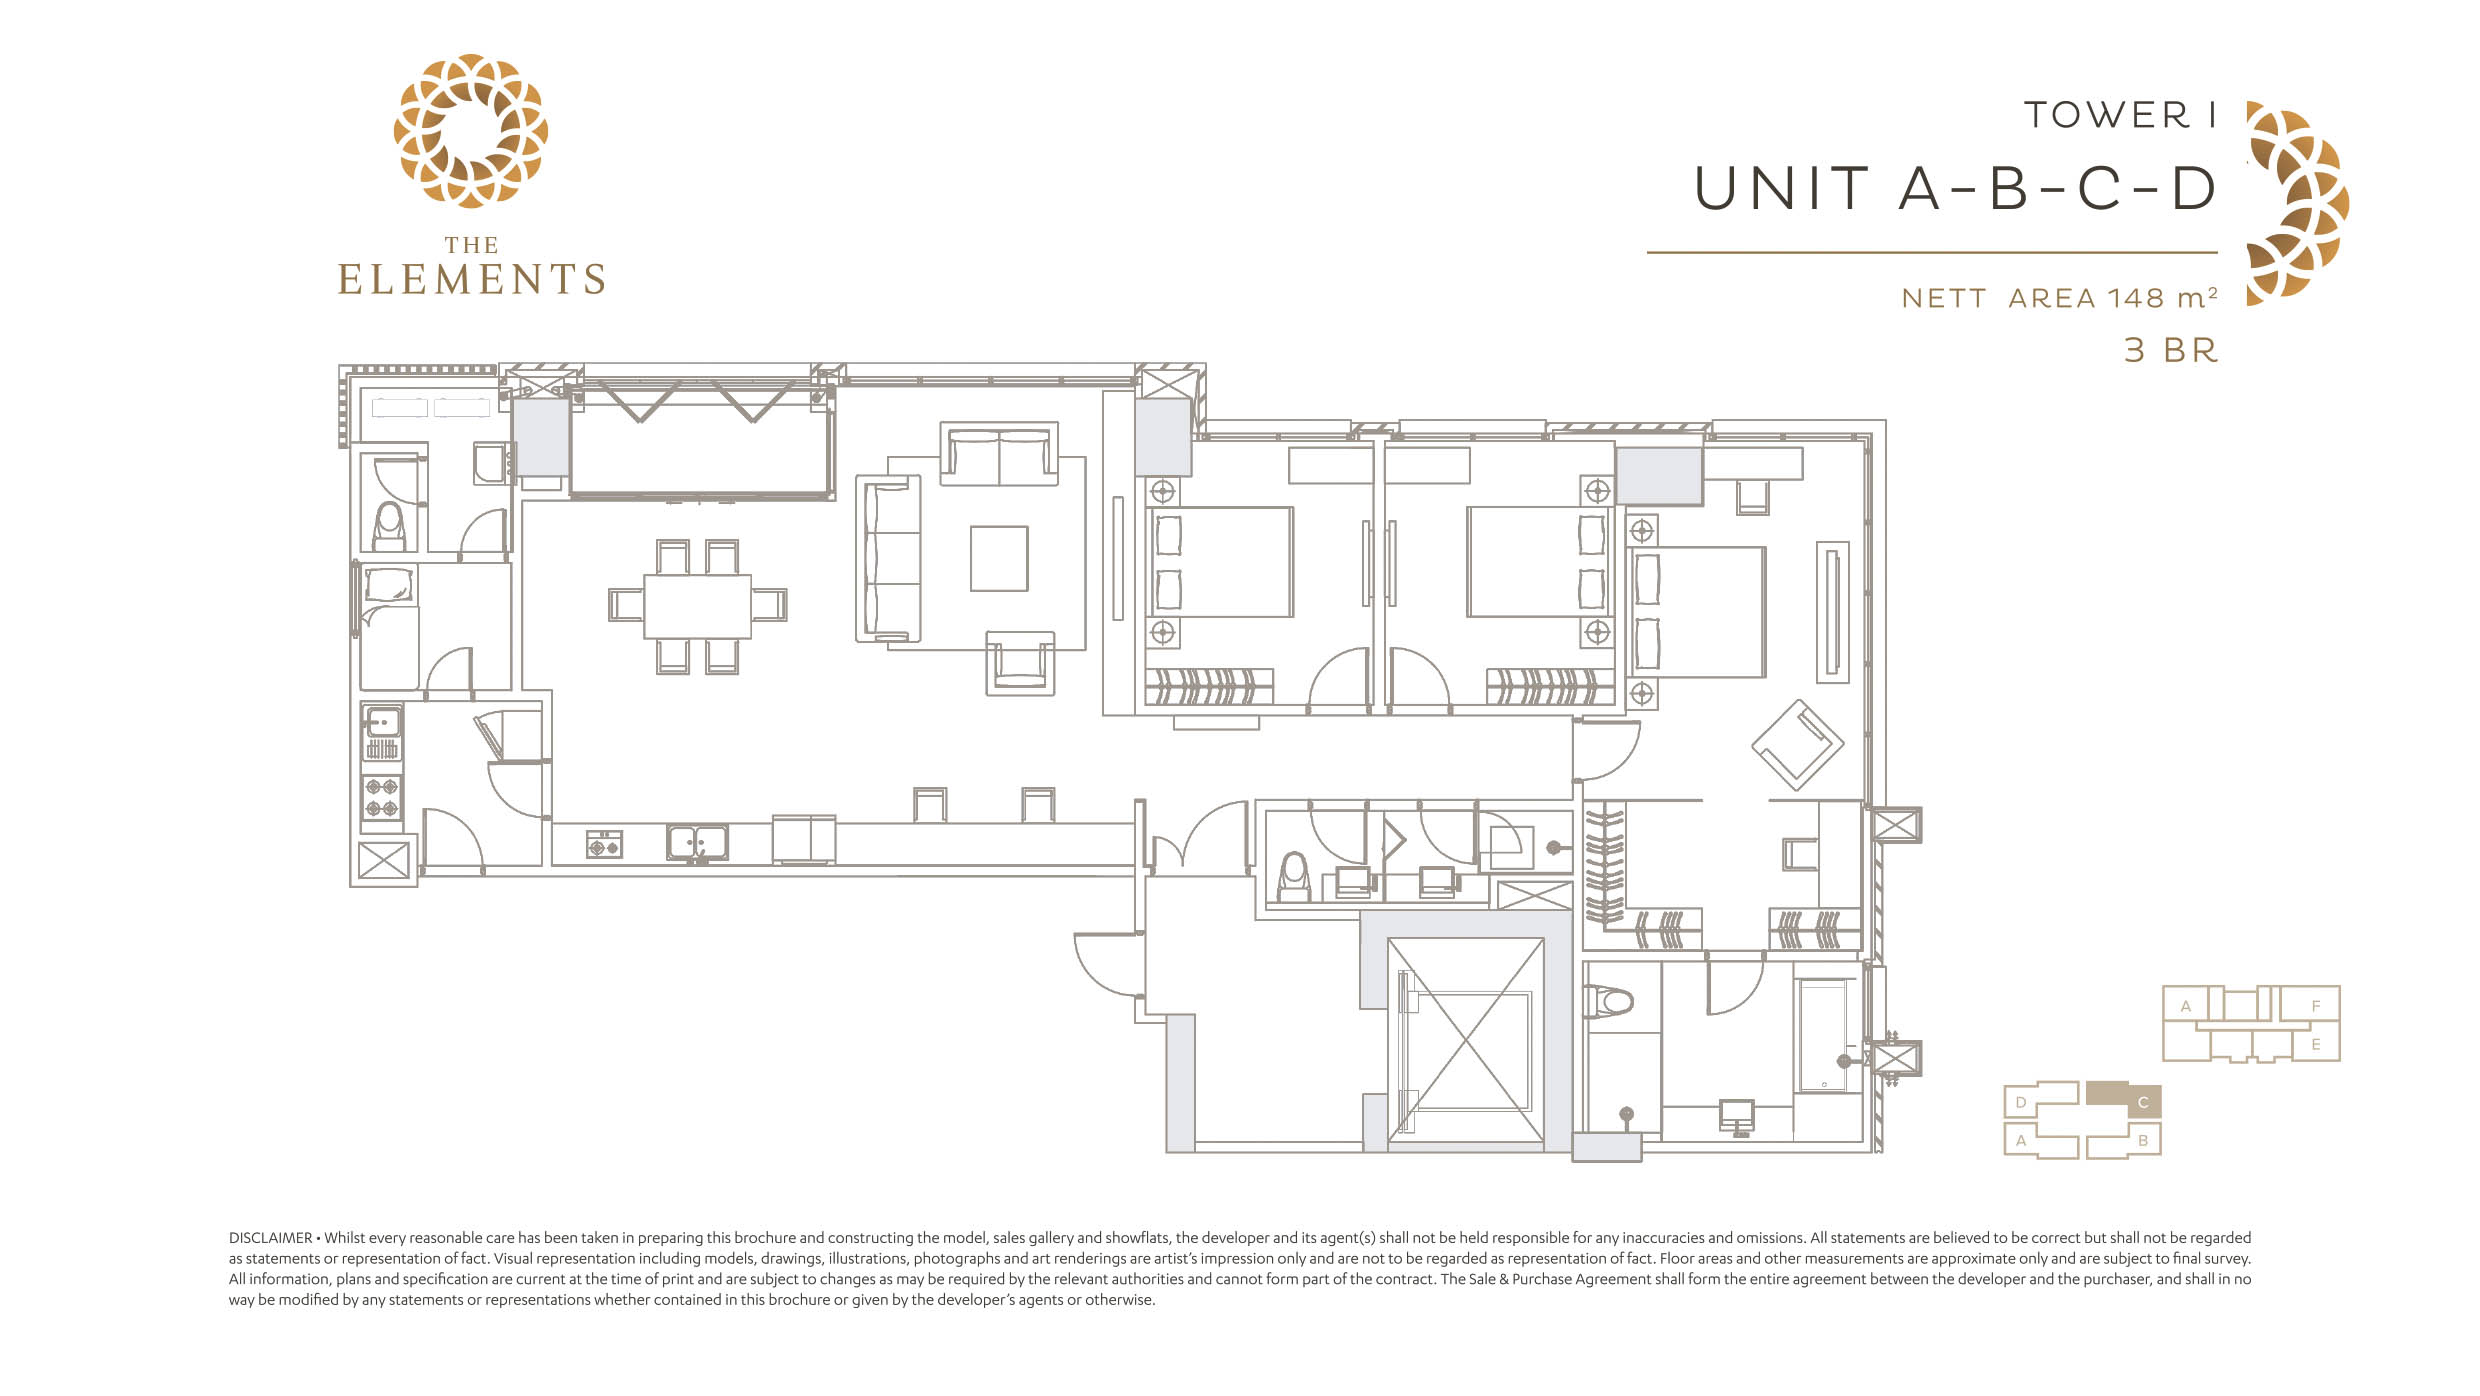 The Elements Serenity Tower - Unit A/B/C/D